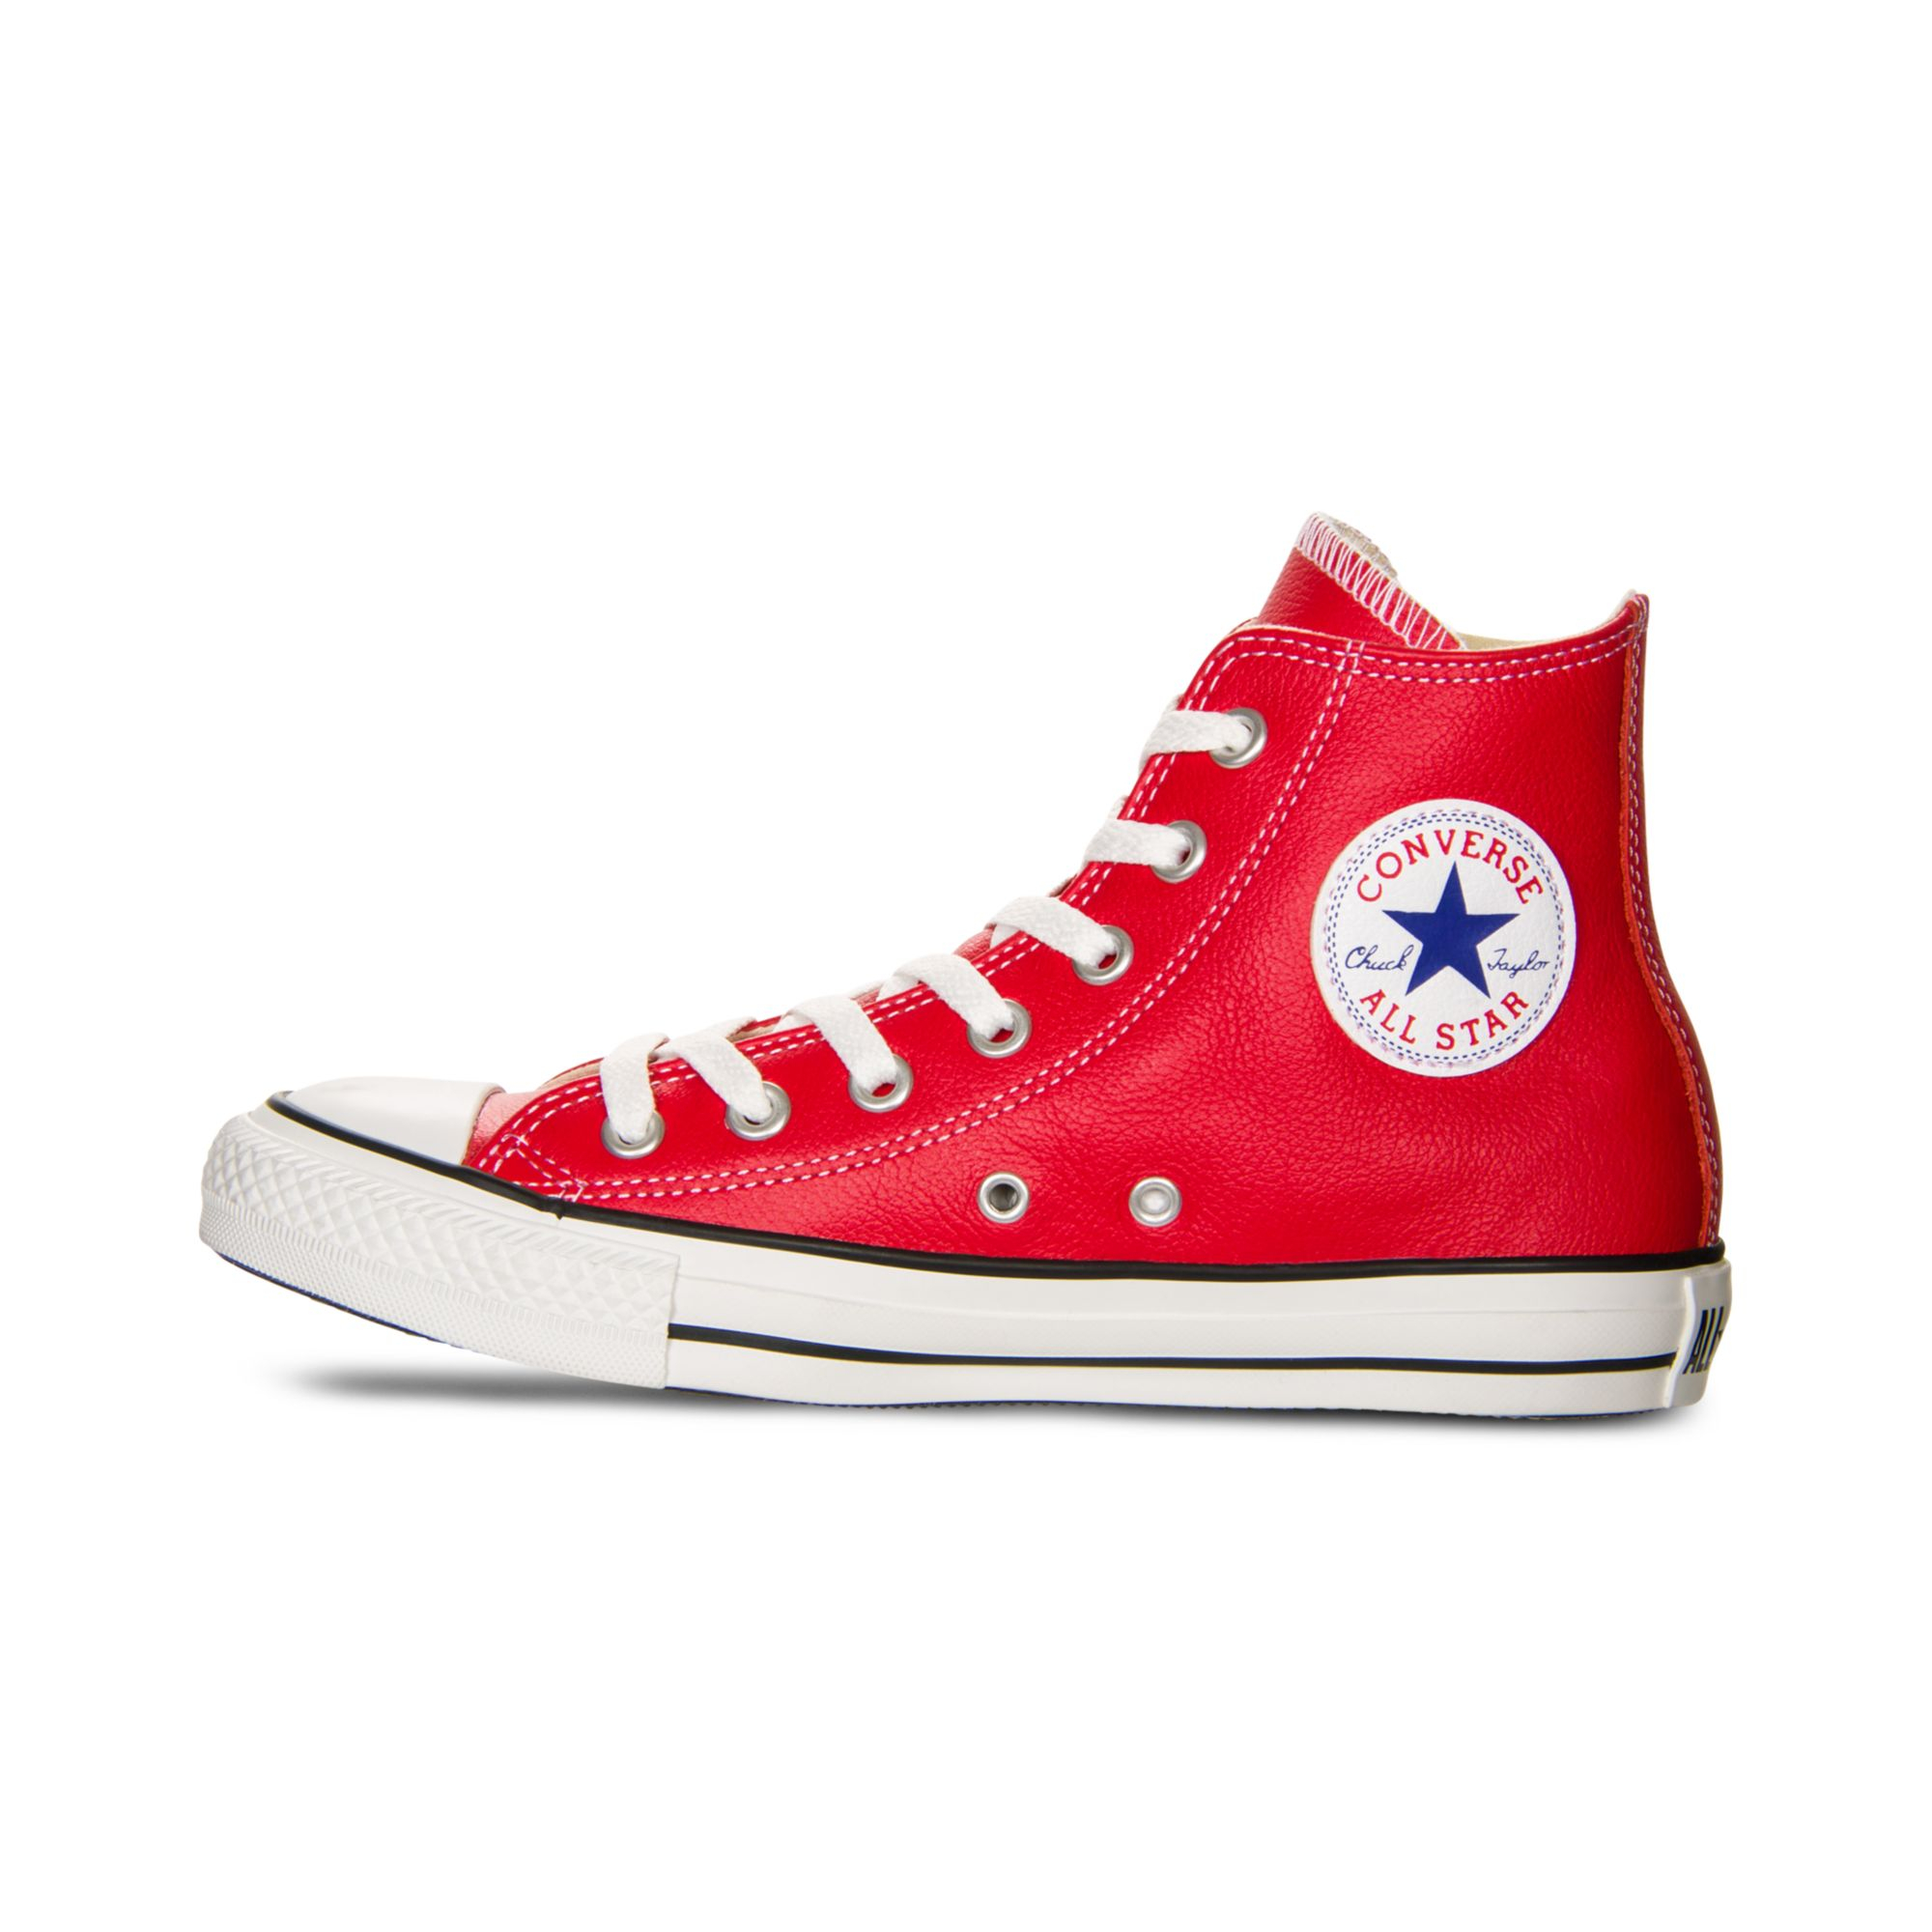 Converse Basic Leather Hi Casual Sneakers in Red for Men - Lyst